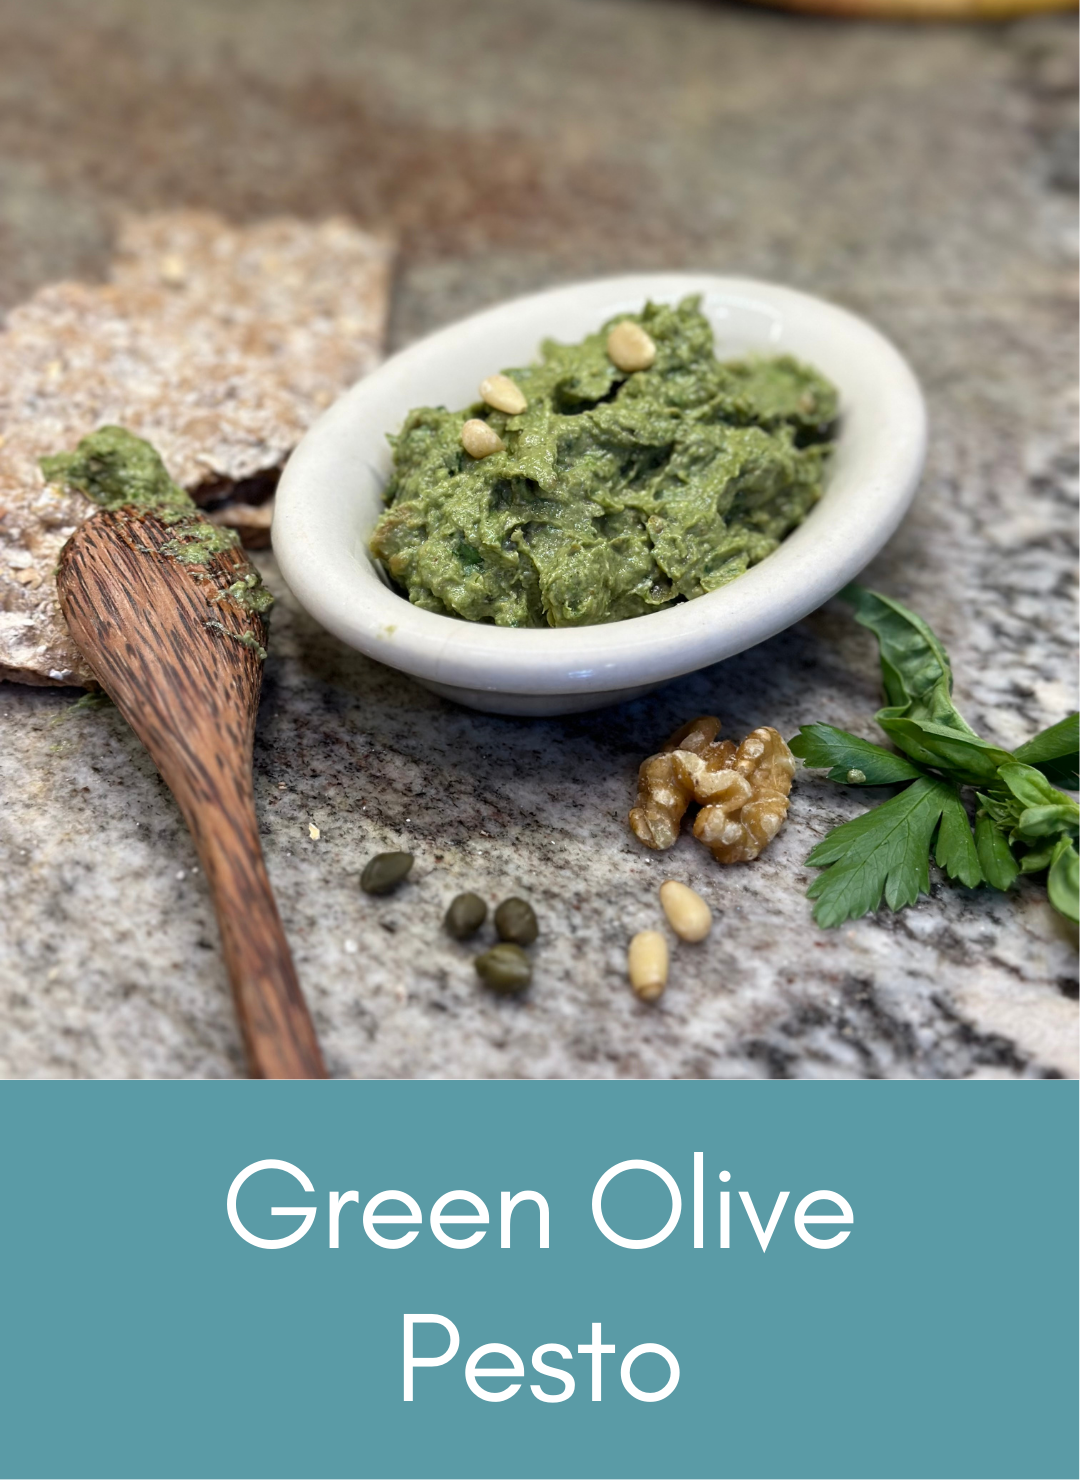 Whole food plant based green olive pesto sauce Picture with link to recipe